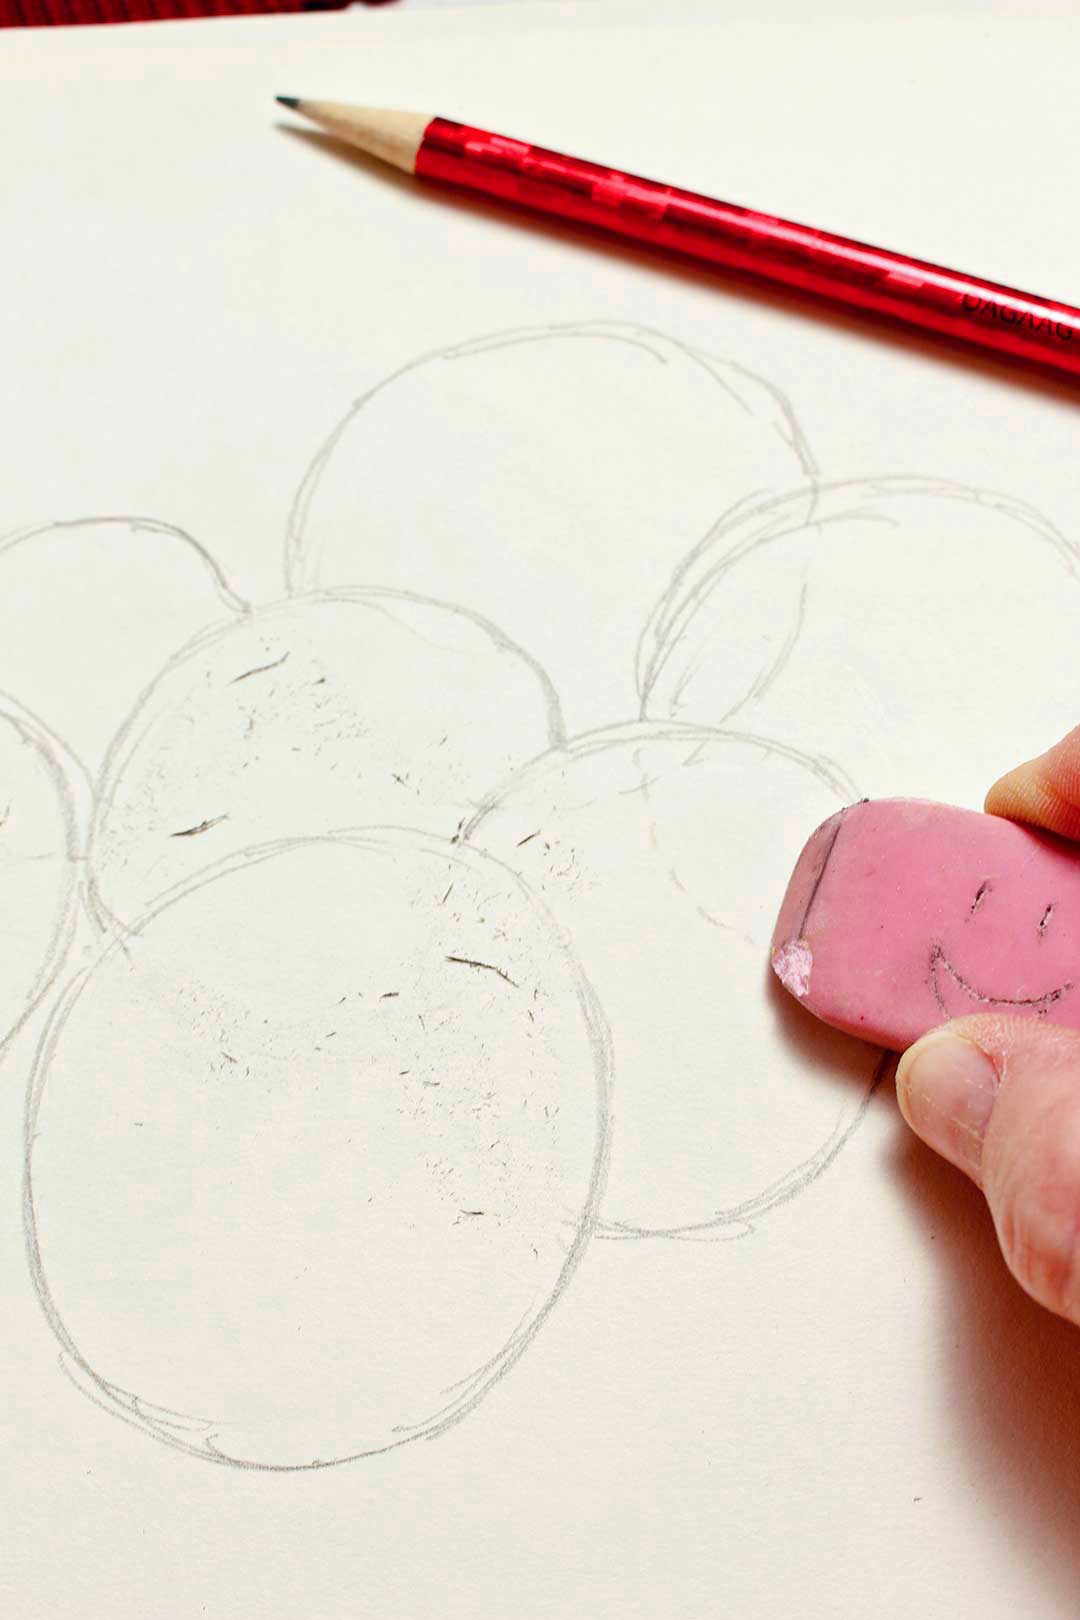 Close up view of a person erasing overlapping lines on their sphere drawing with a pink eraser.